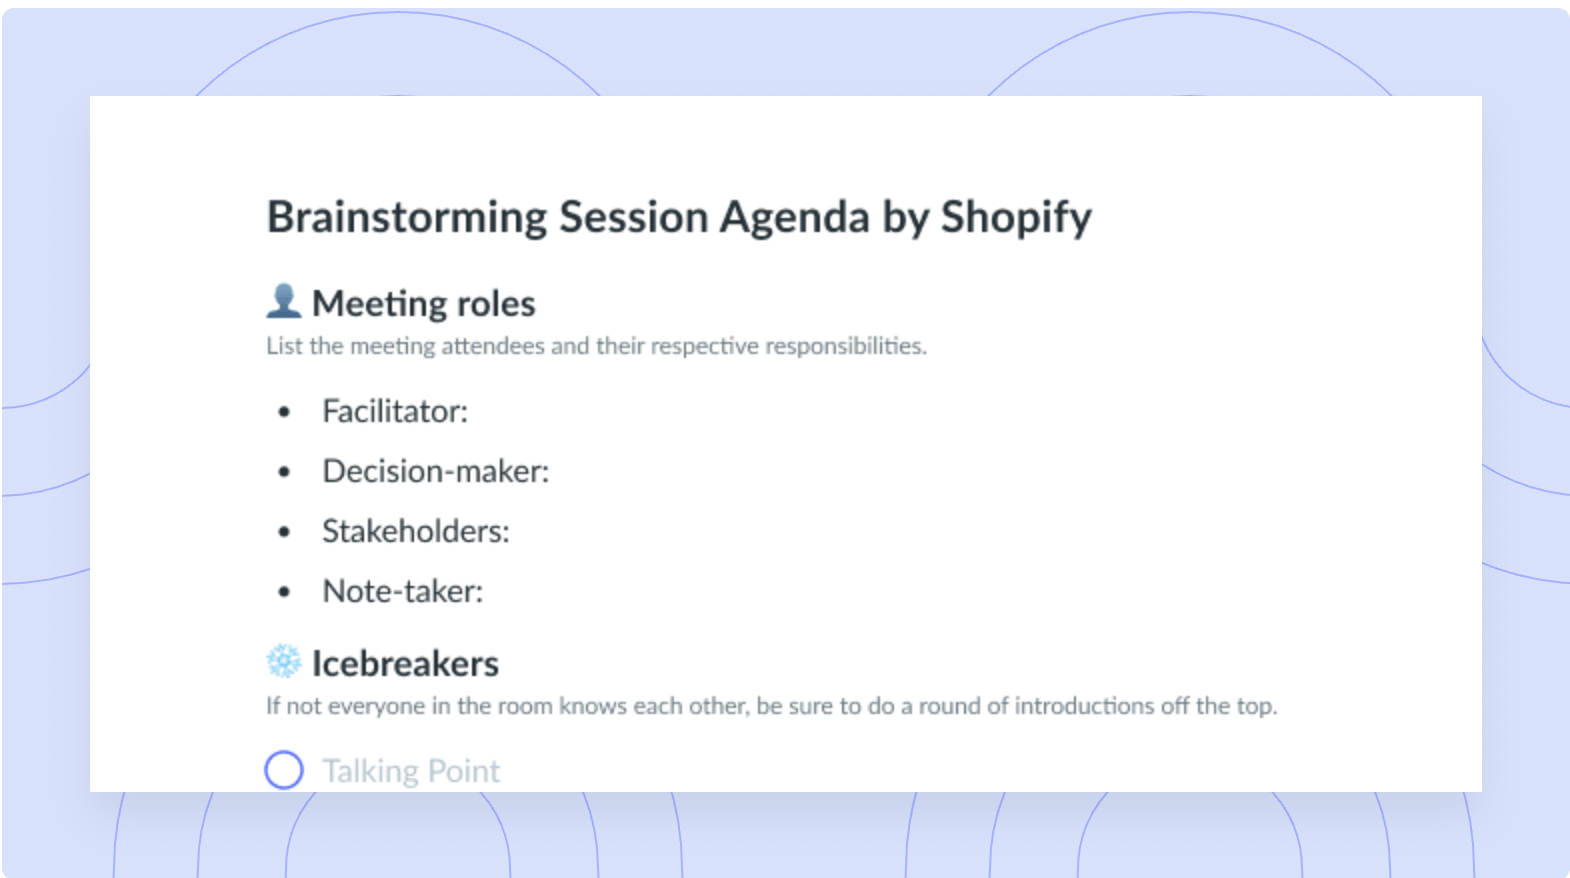 Brainstorming Session Agenda by Shopify